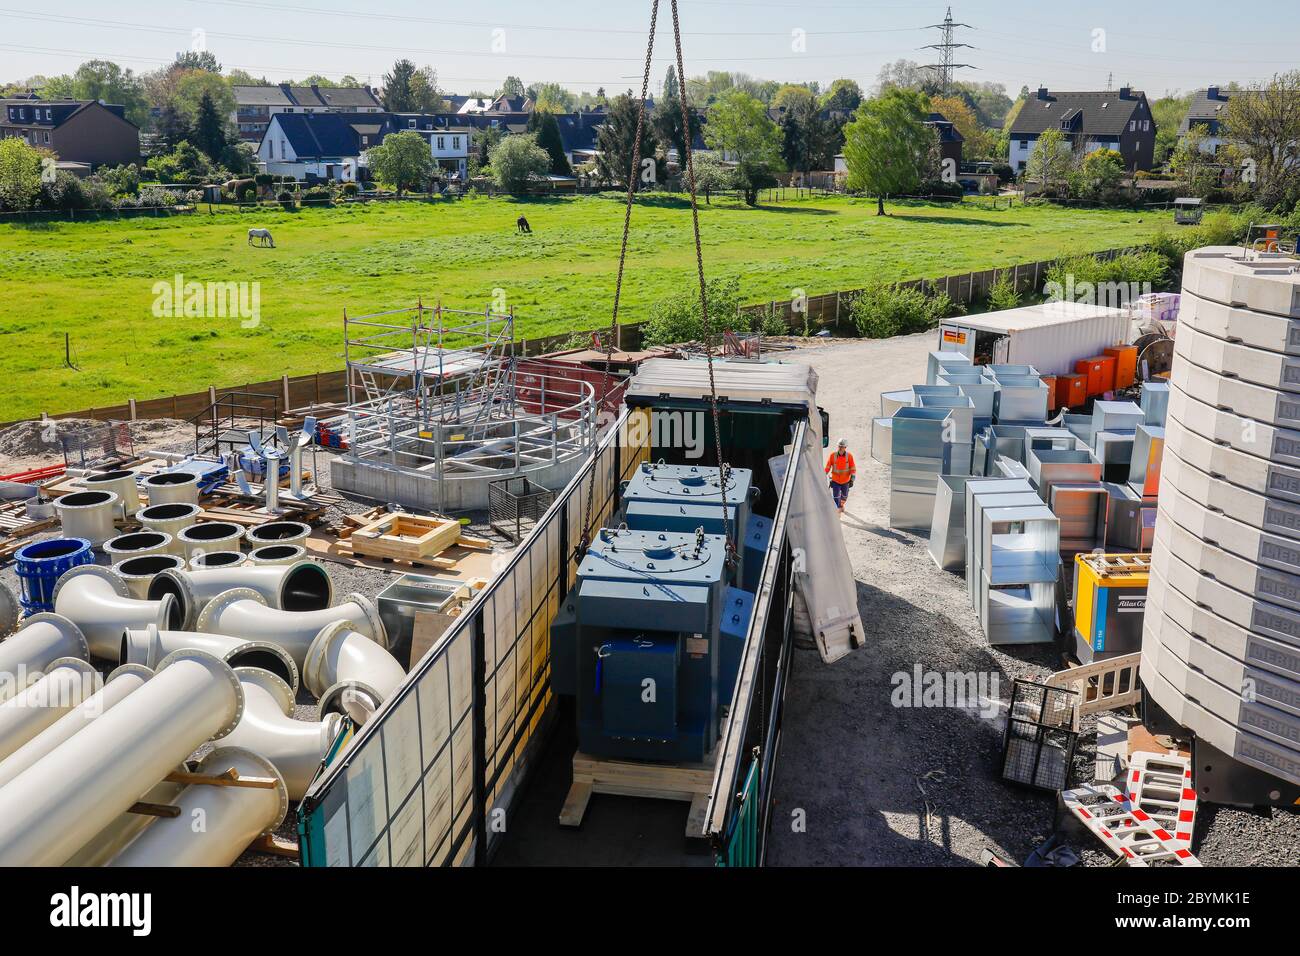 22.04.2020, Oberhausen, North Rhine-Westphalia, Germany - Emscher conversion, new construction of the Emscher sewer AKE, here the new pumping station Stock Photo